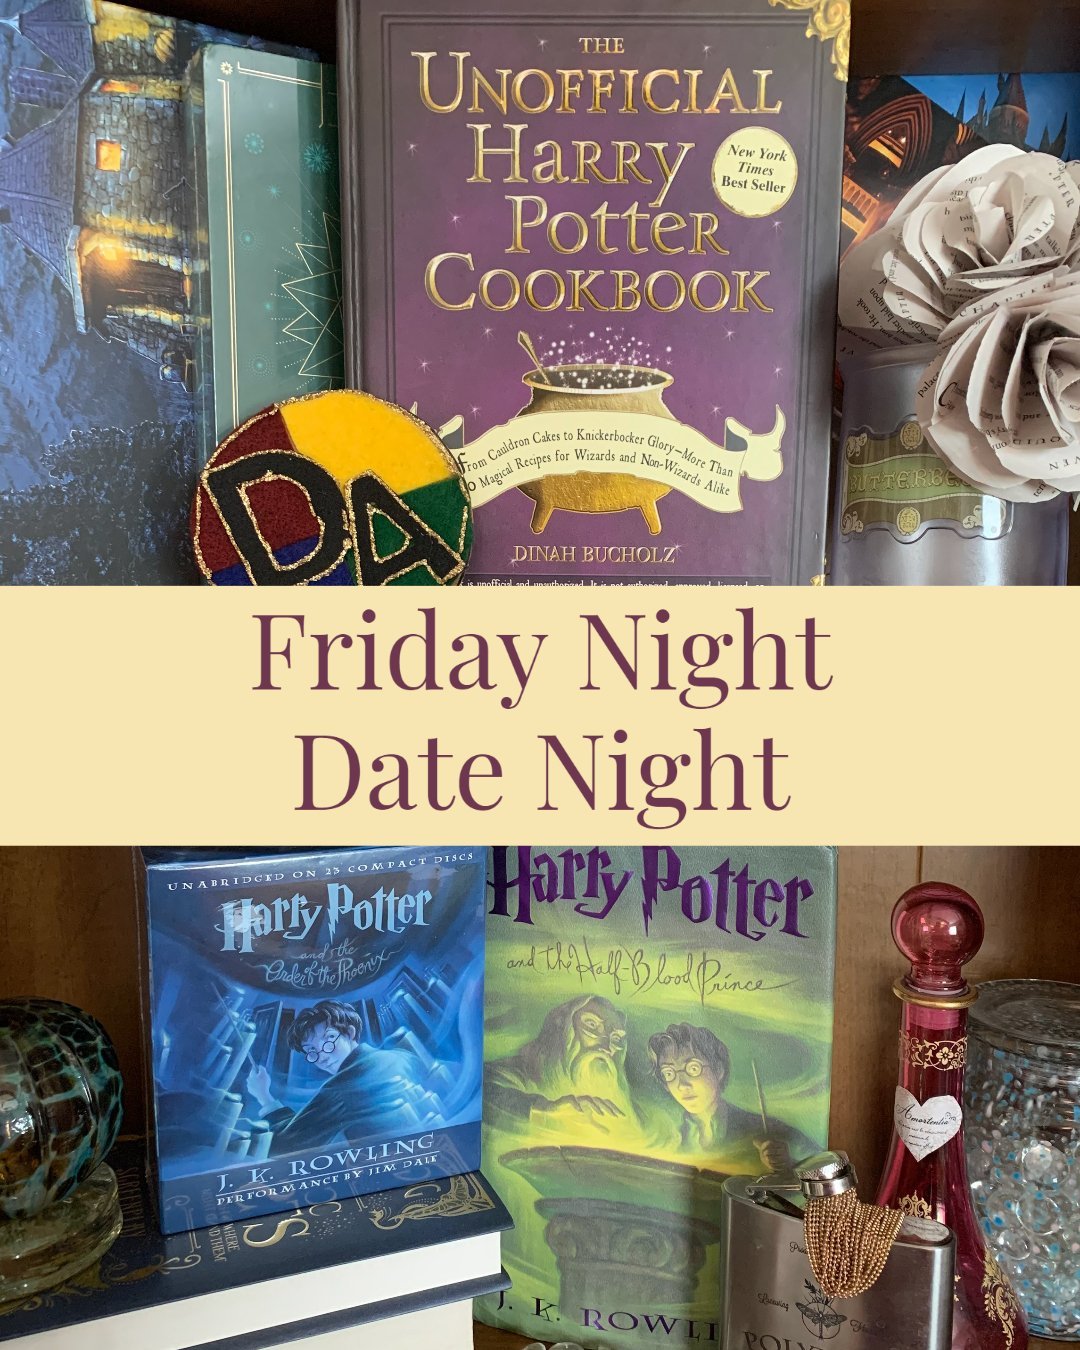 Friday Night Date Night: Harry Potter Double Feature, Pt. 3 of 4 - B.T. Polcari